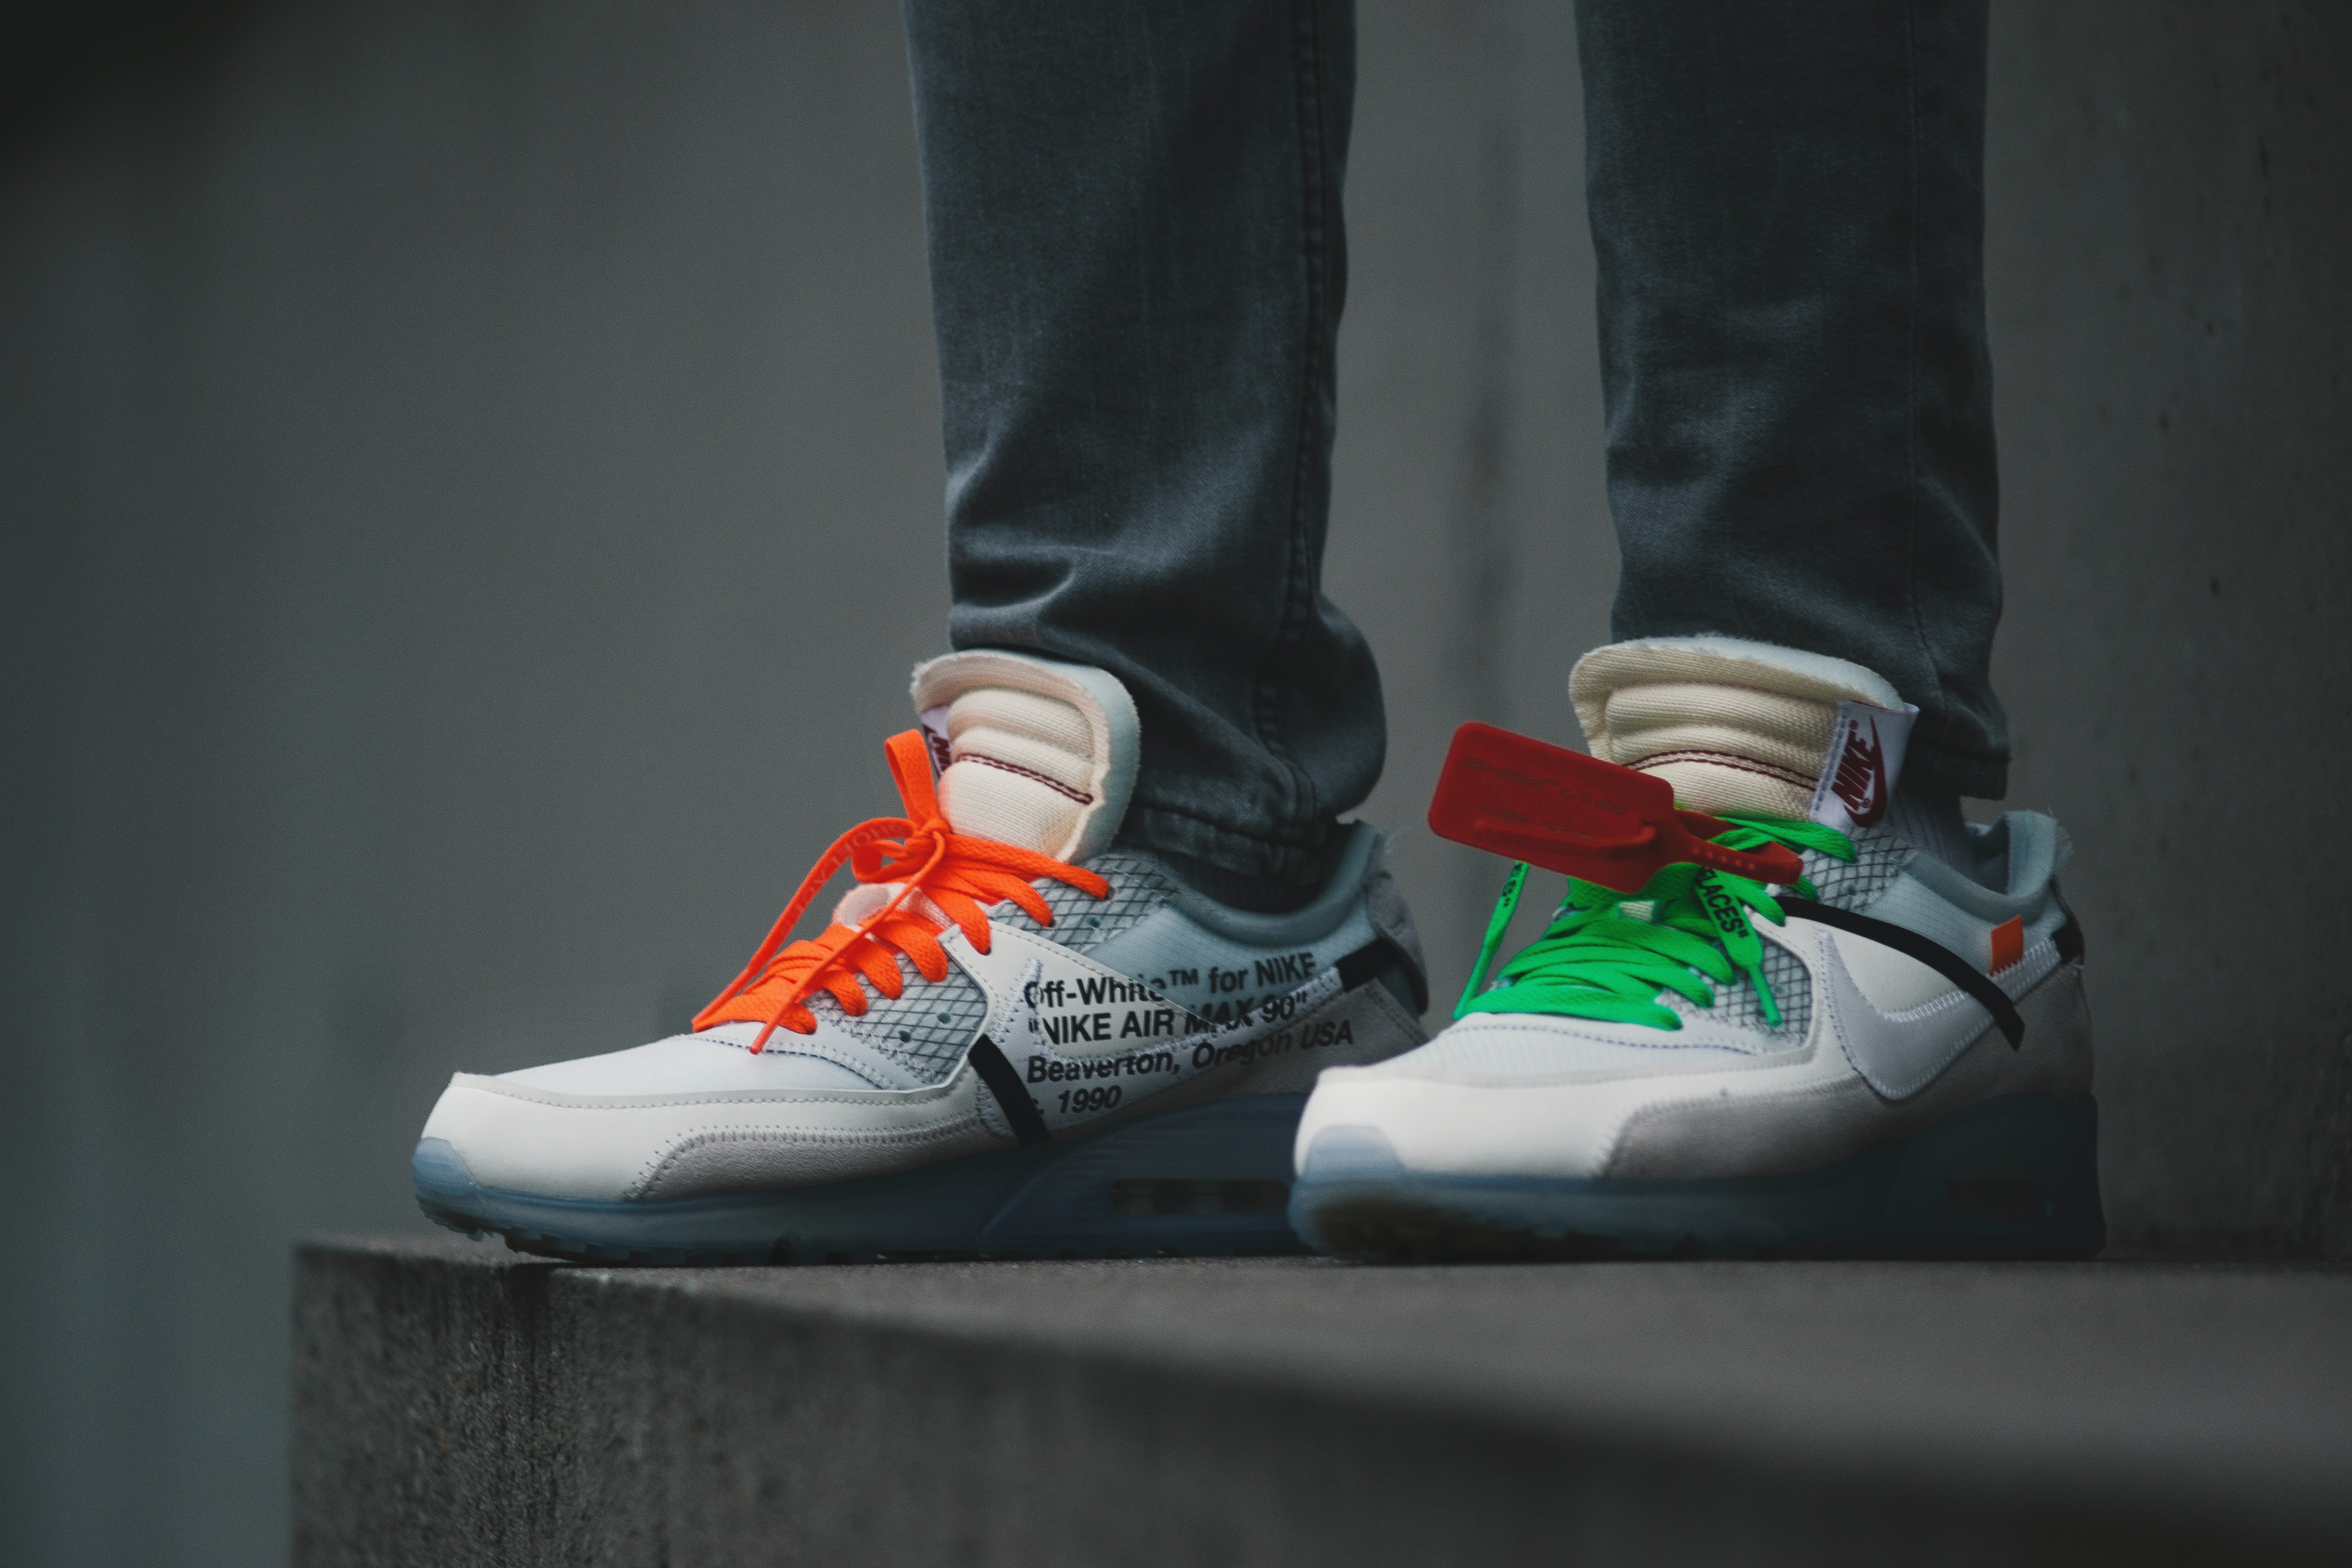 Person Wearing White Green And Orange Sneakers Photo Shoe